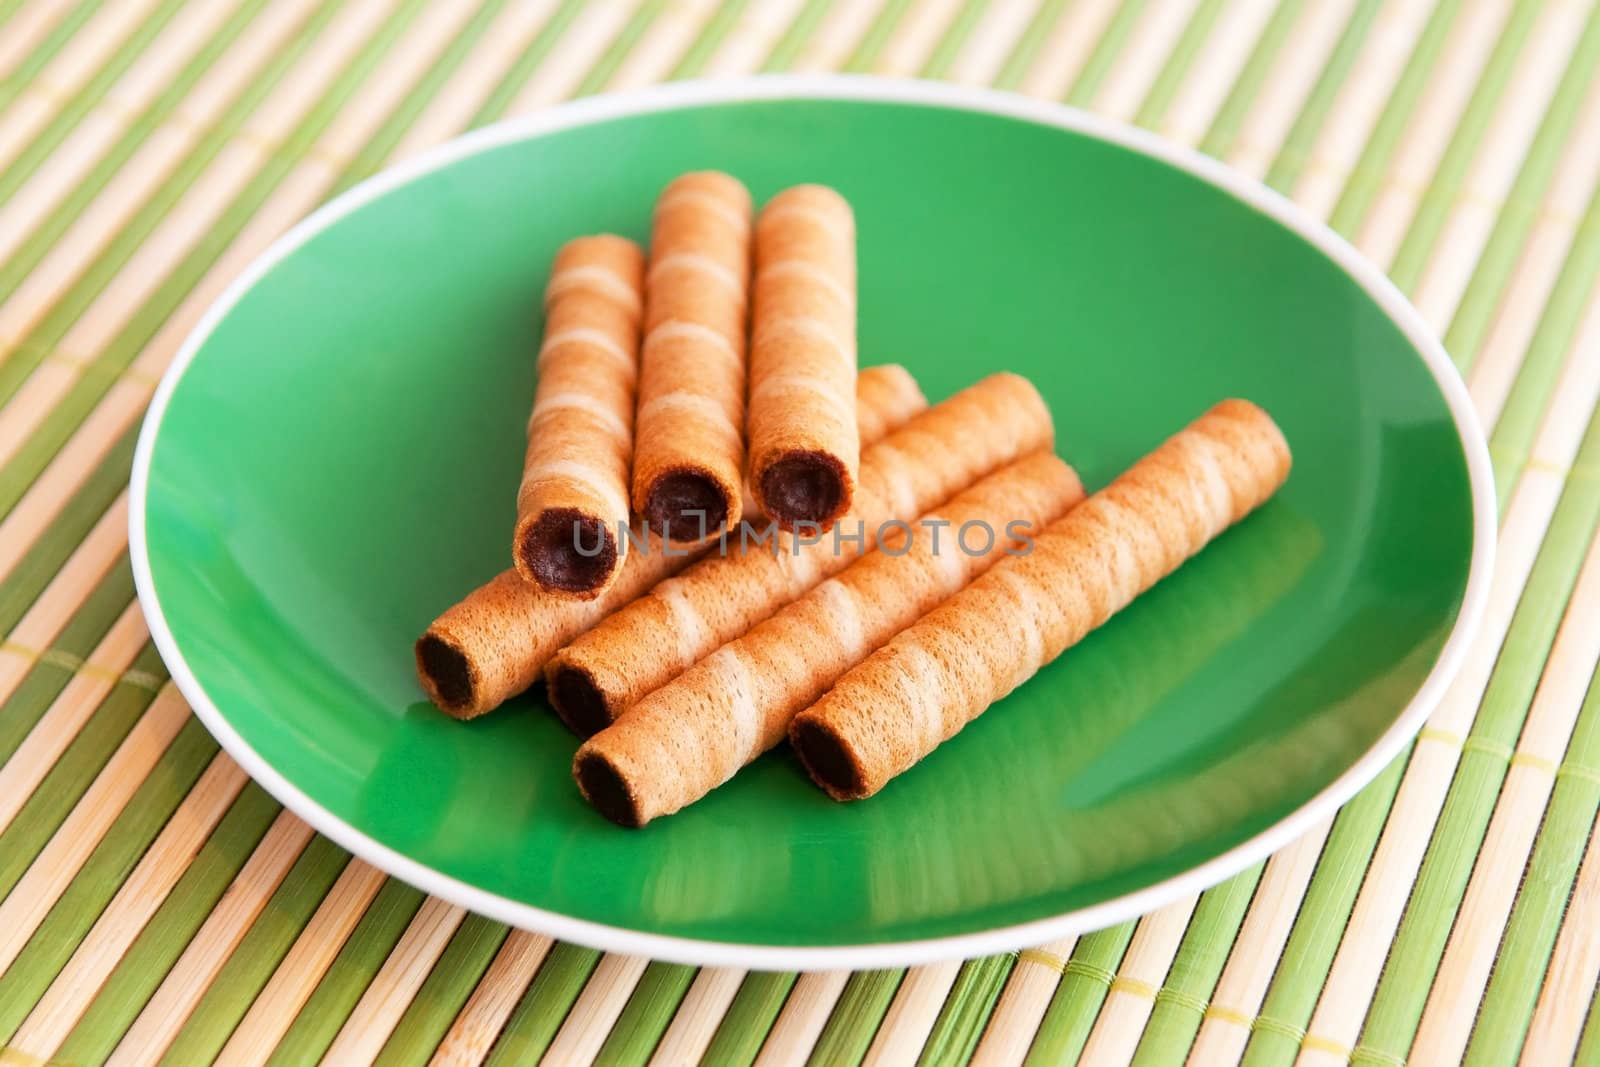 Wafer rolls with chocolate on the green plate